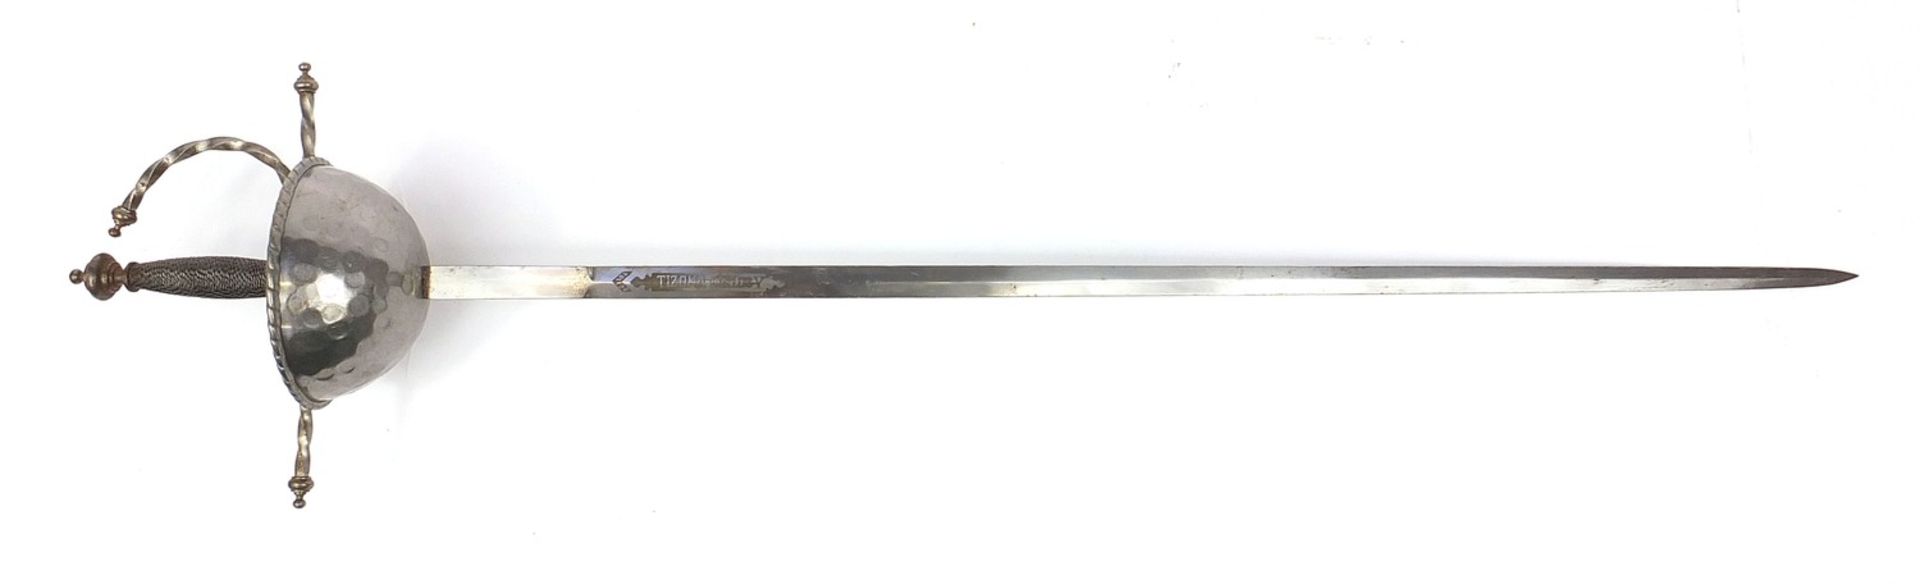 Spanish Toledo sword engraved Tizona Carlos-V to the blade, 103.5cm in length :For Further Condition - Image 3 of 5